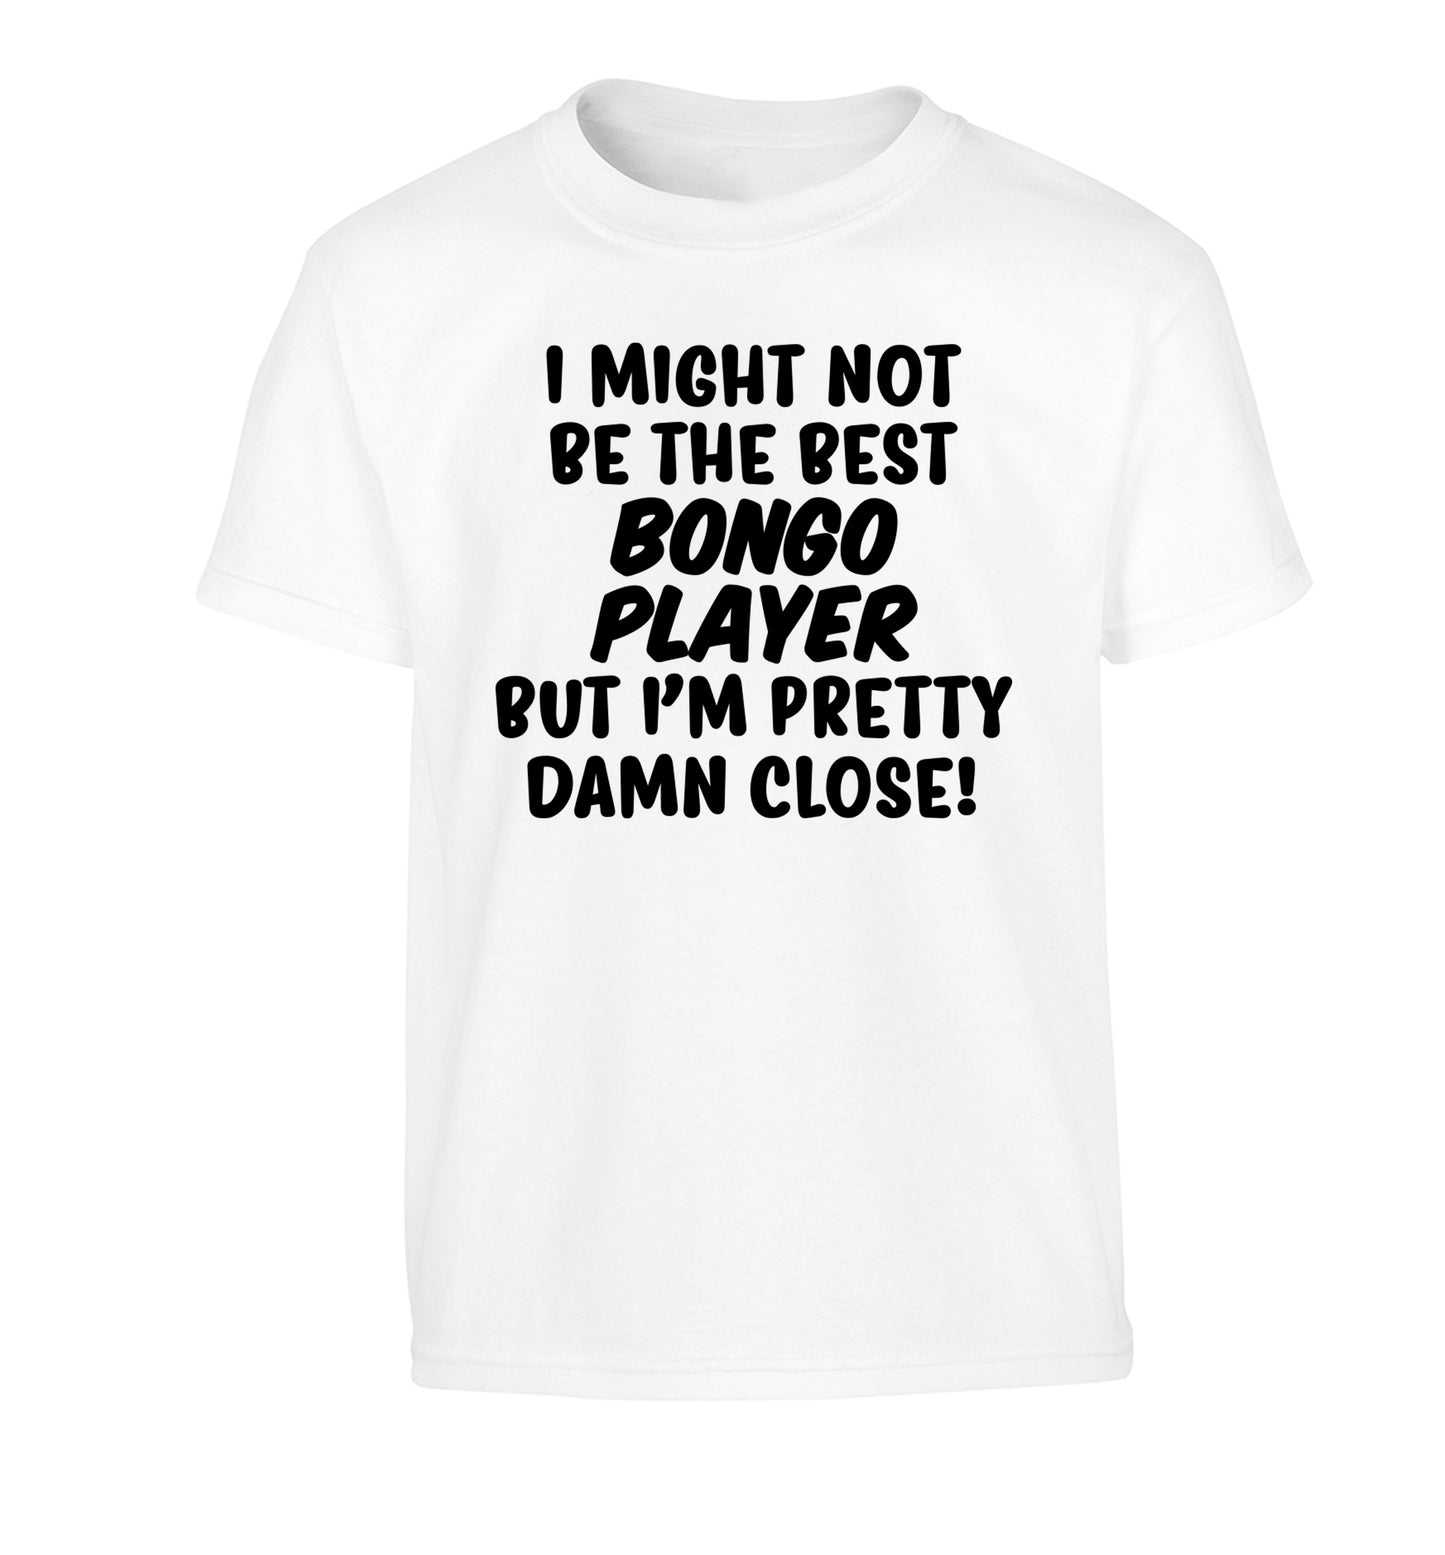 I might not be the best bongo player but I'm pretty close! Children's white Tshirt 12-14 Years